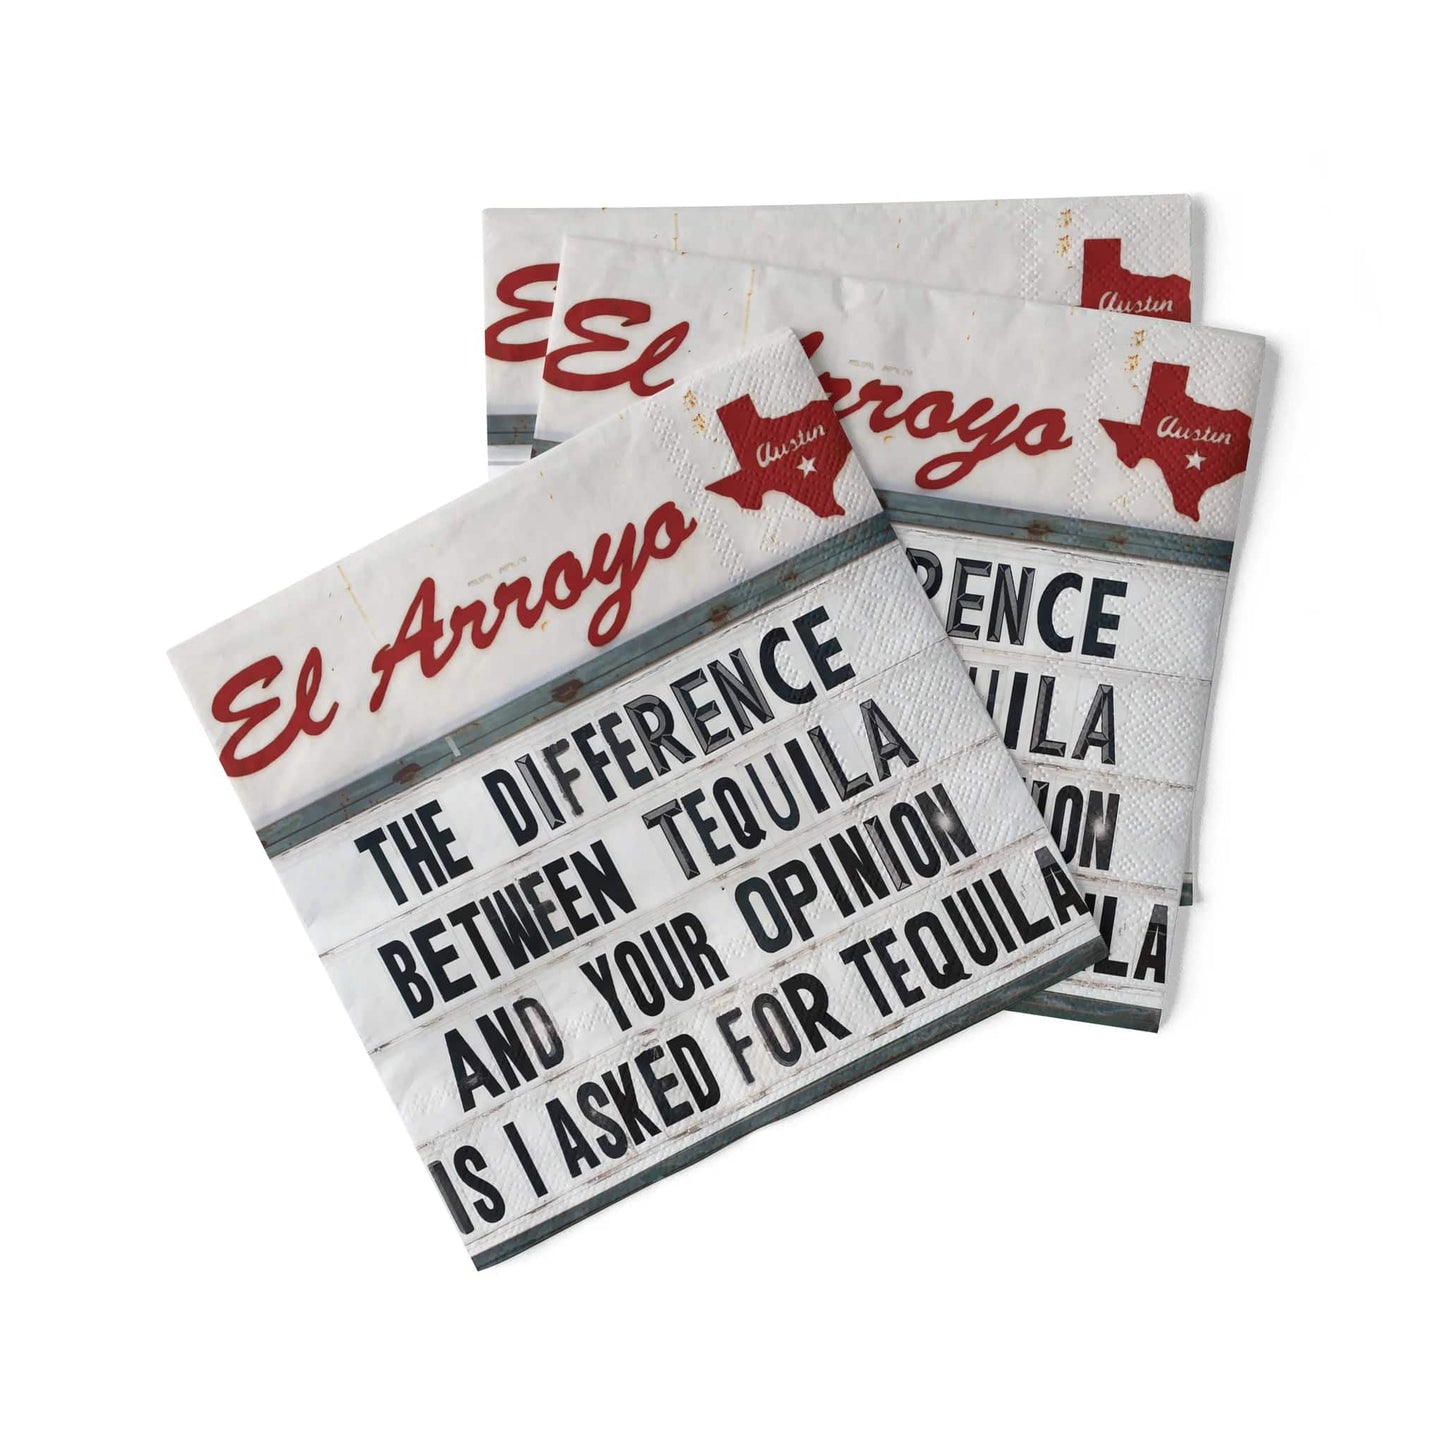 el arroyo - Cocktail Napkins (Pack of 20) - Tequila Opinion - Findlay Rowe Designs